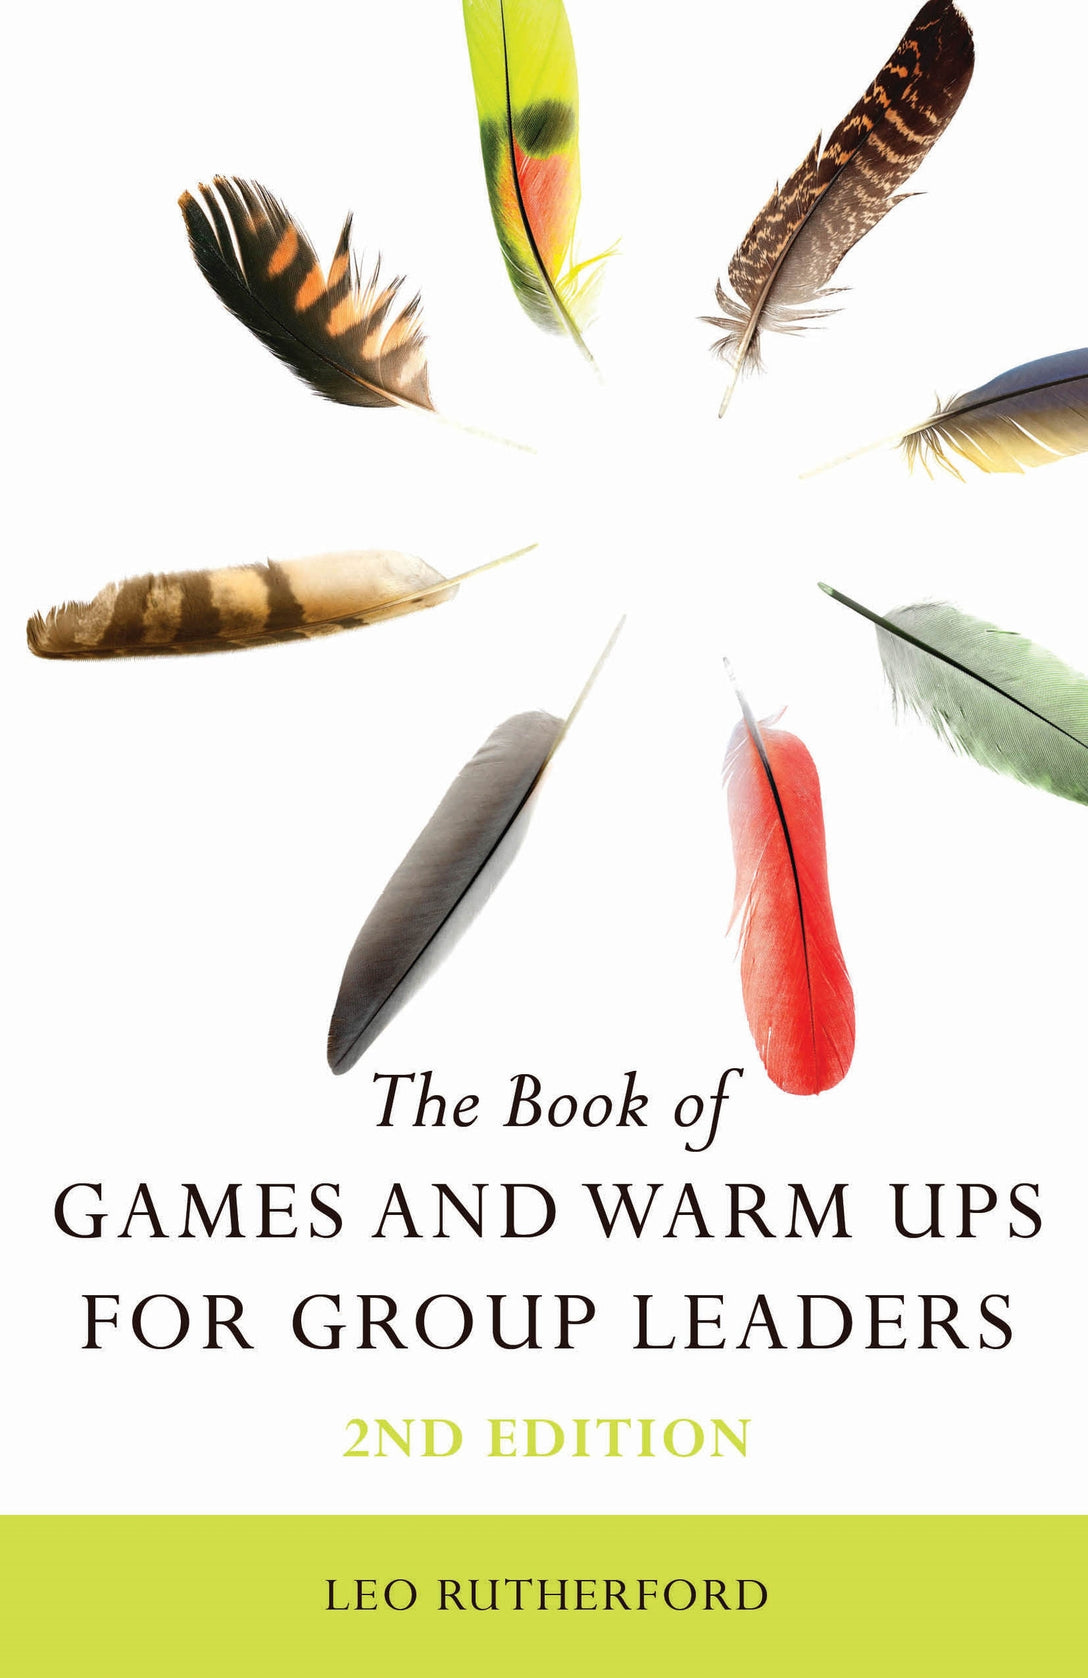 The Book of Games and Warm Ups for Group Leaders 2nd Edition by Leo Rutherford